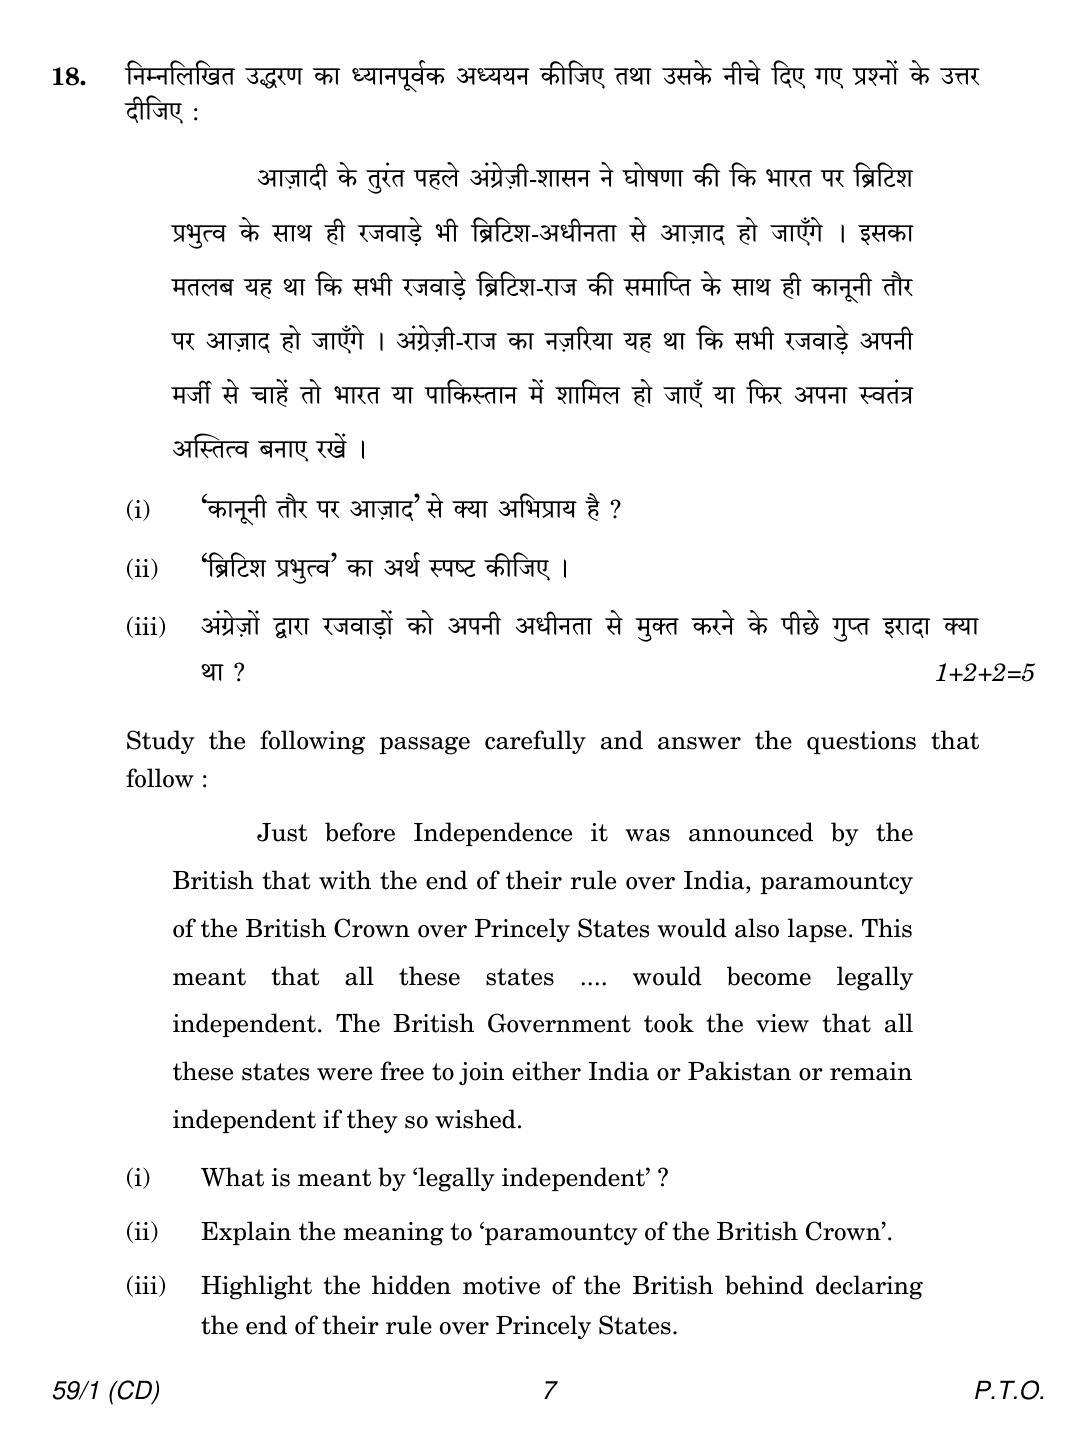 CBSE Class 12 59-1 POLITICAL SCIENCE CD 2018 Question Paper - Page 7